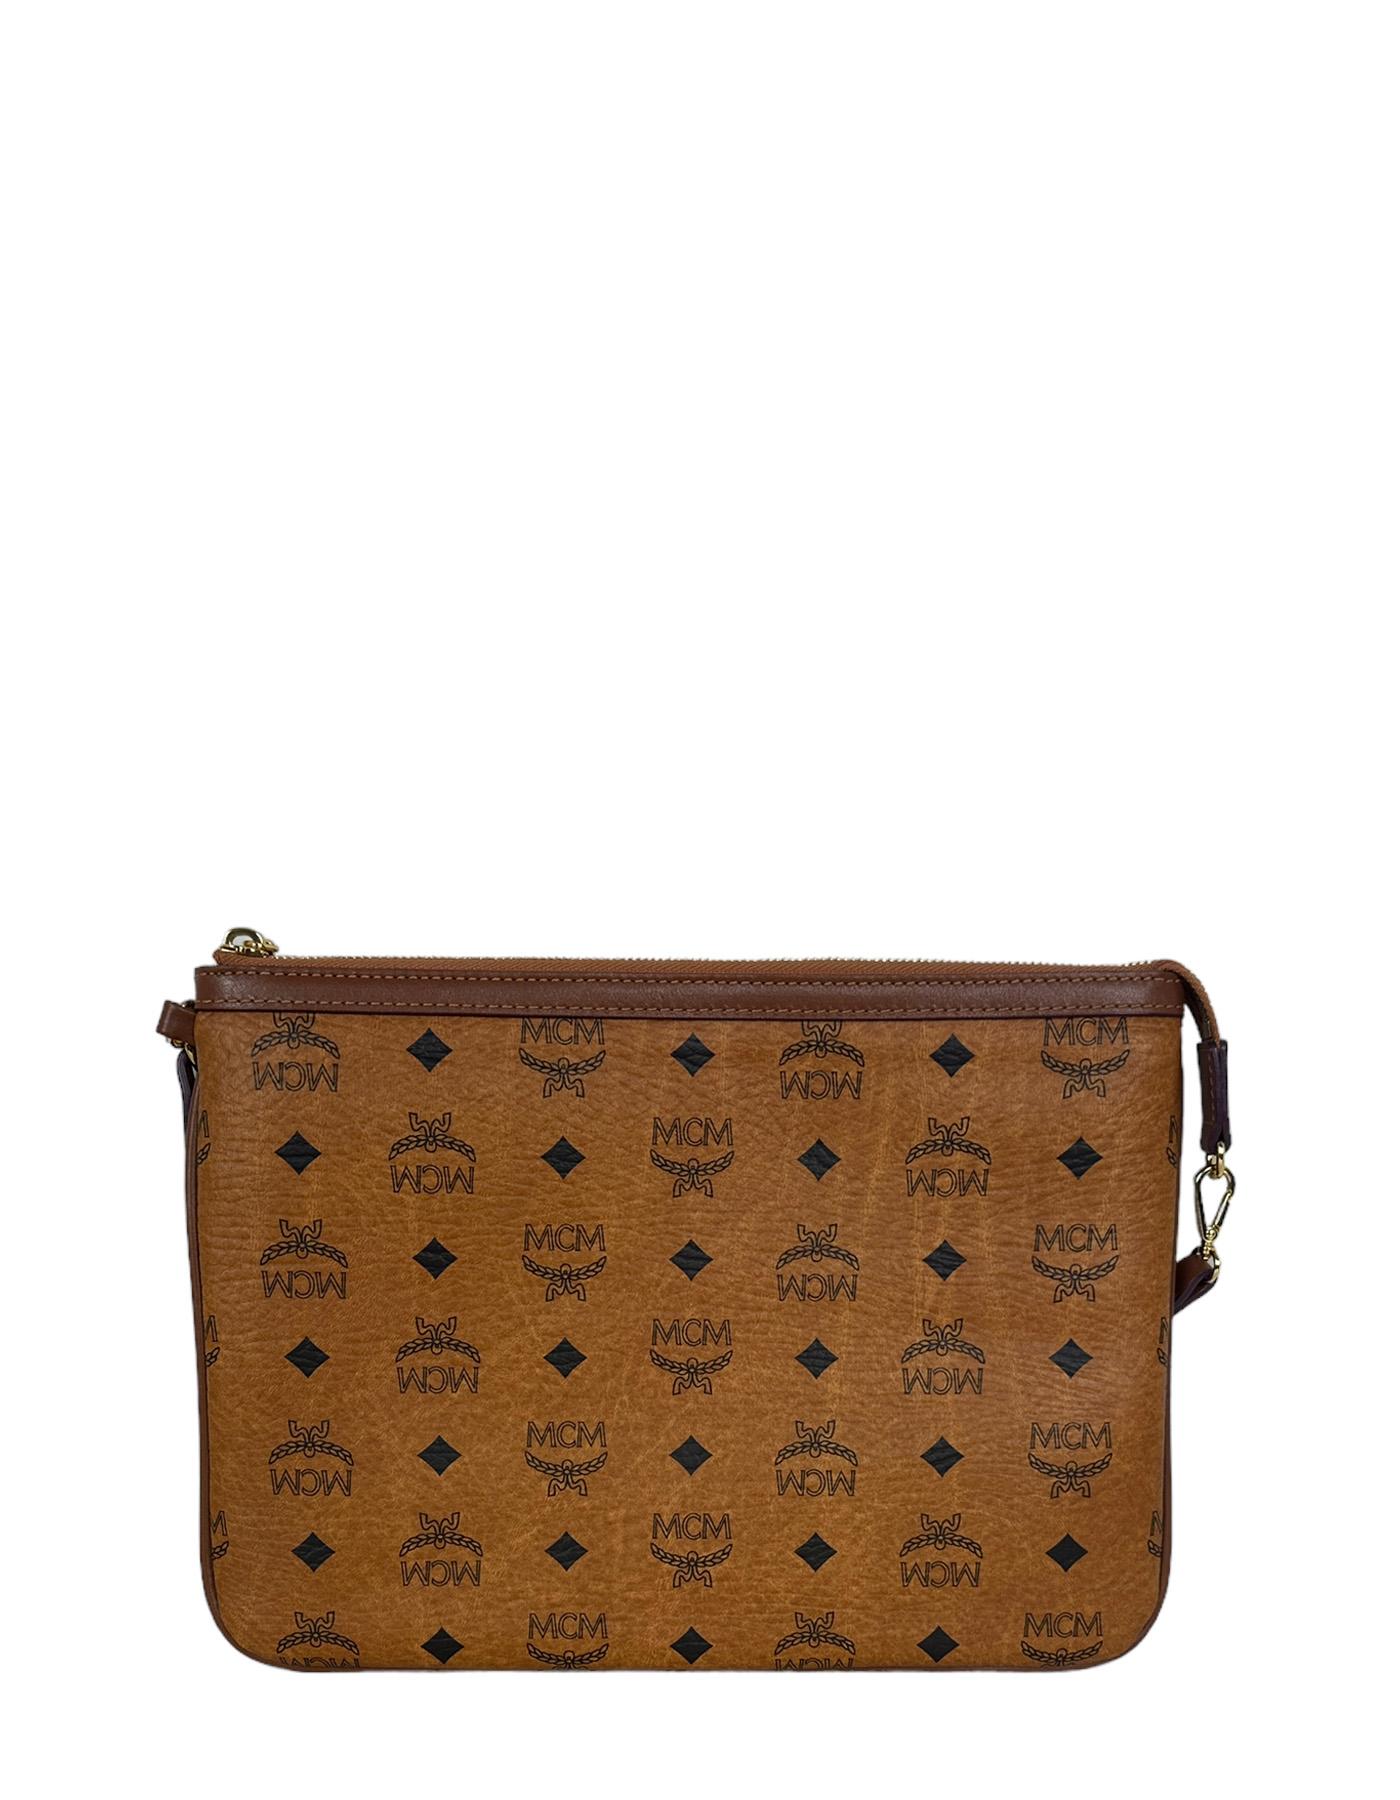 MCM Tan Visetos Monogram Pouch Bag. Strap can be moved to also be used as a wristlet
Made In: Korea
Color: Tan
Hardware: Goldtone
Materials: Coated canvas
Lining: Fine textile
Closure/Opening: Zip top 
Exterior Pockets: N/A
Interior Pockets: 